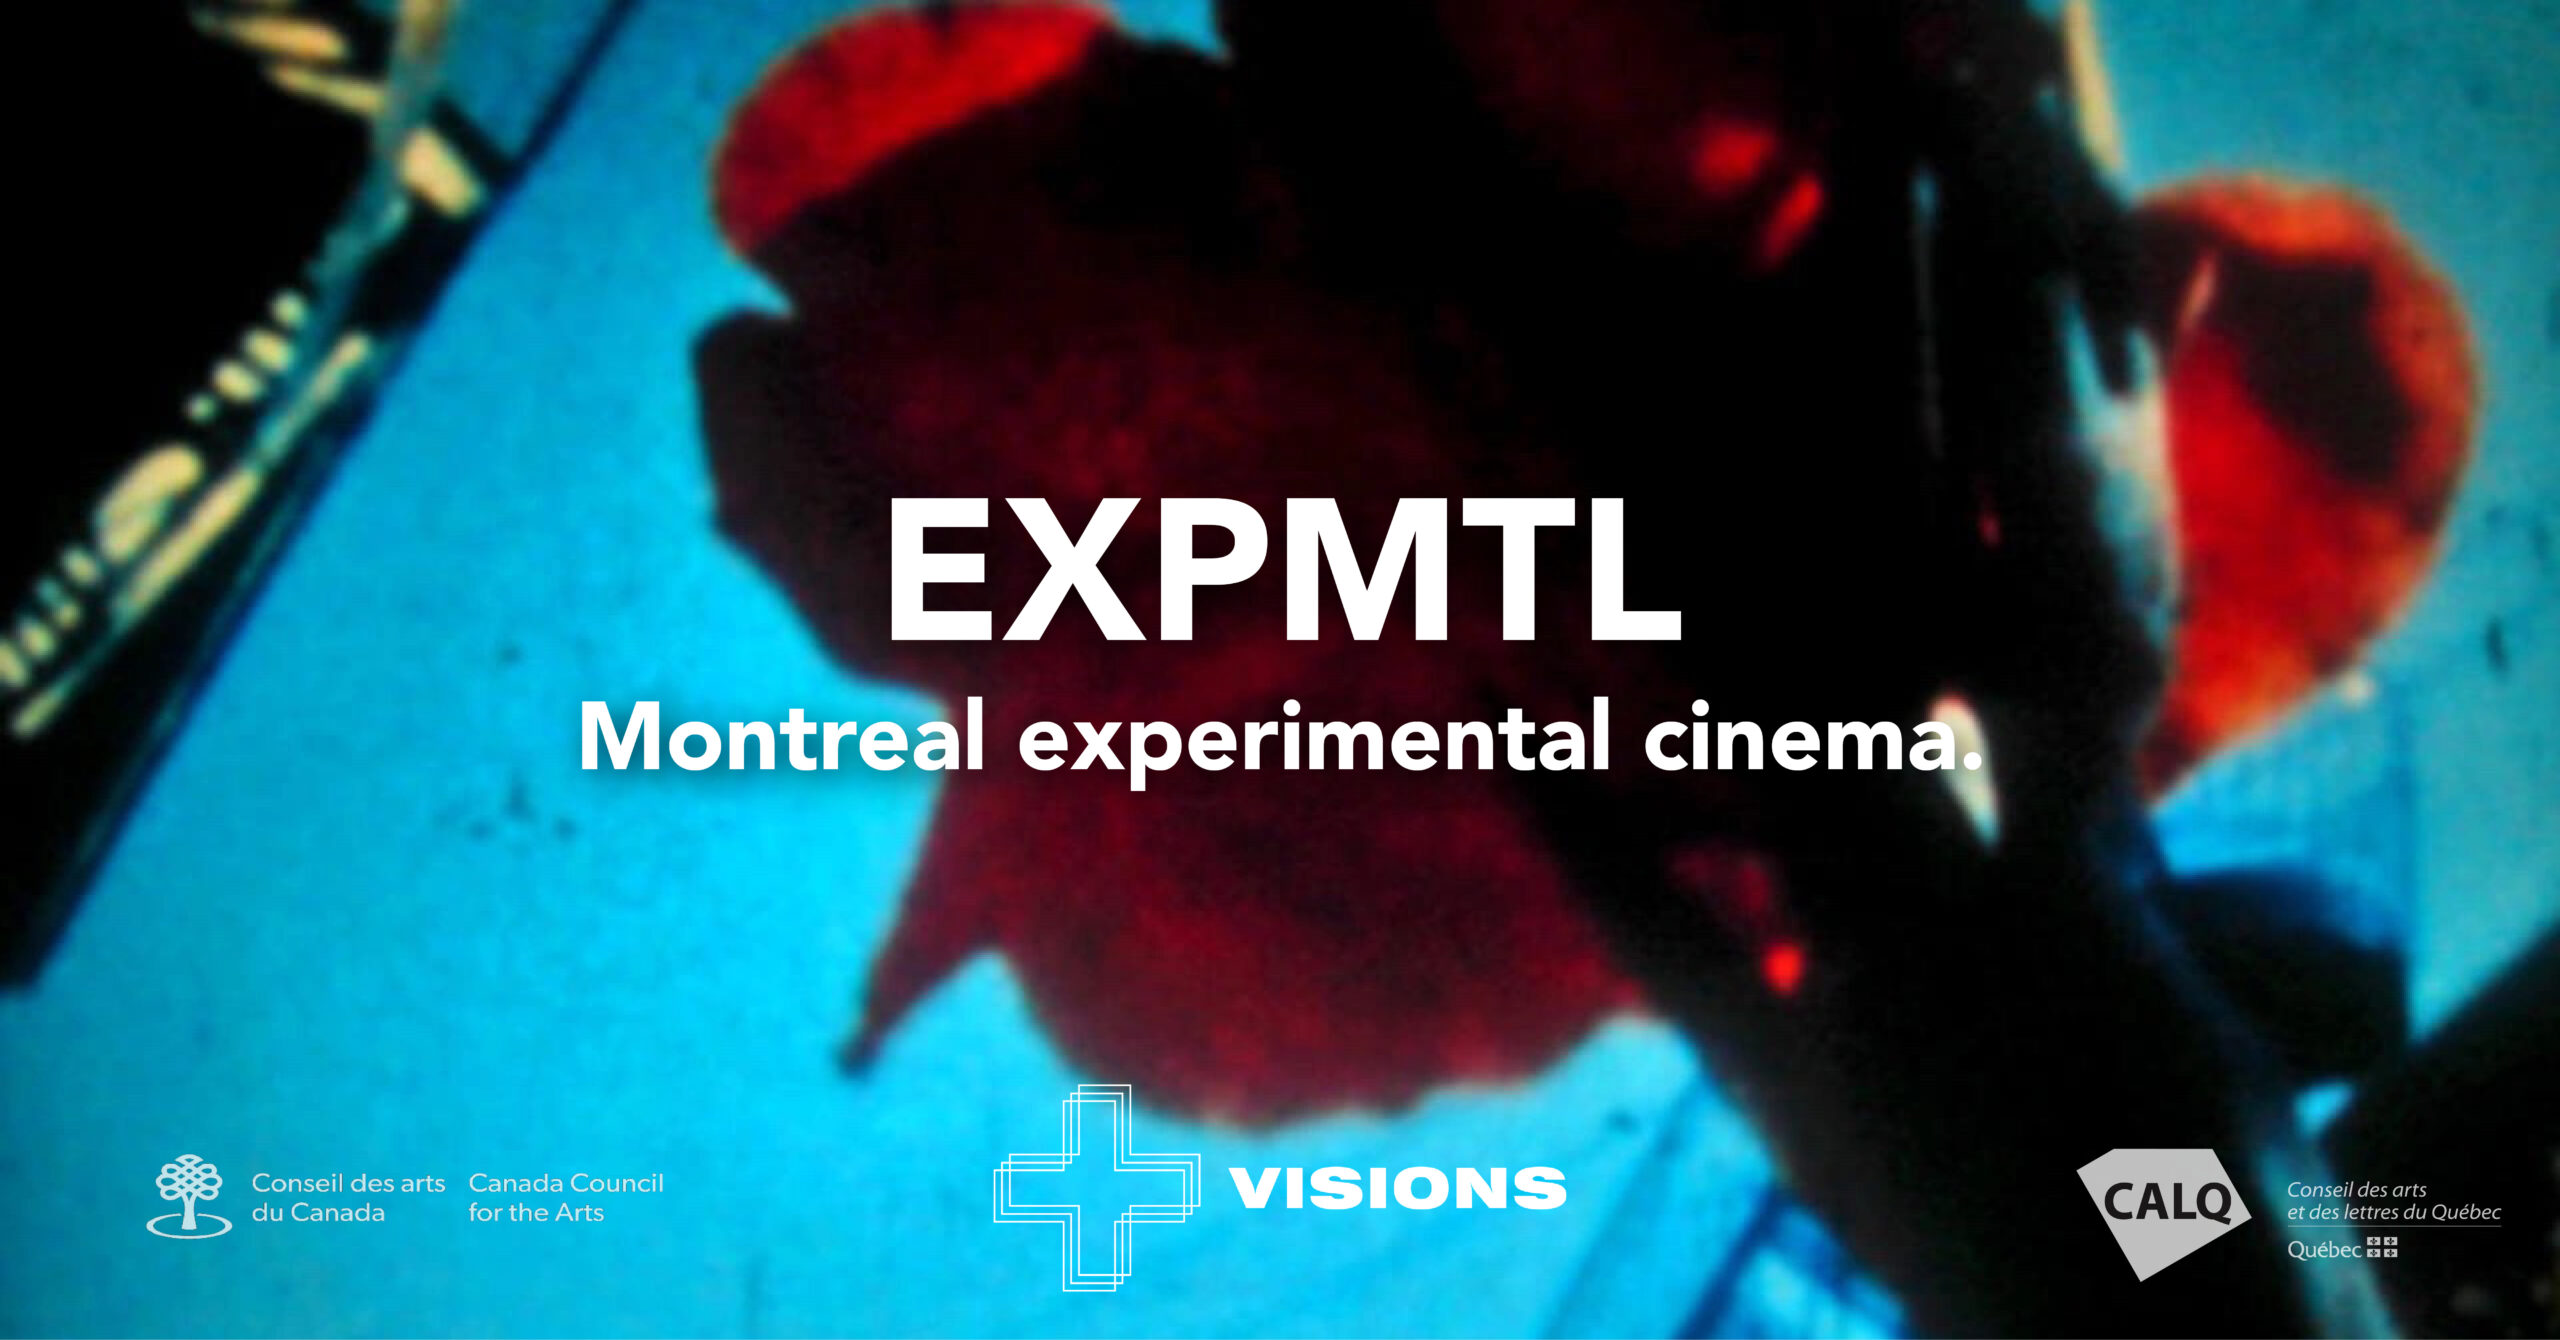 EXPMTL 16mm film from Montreal